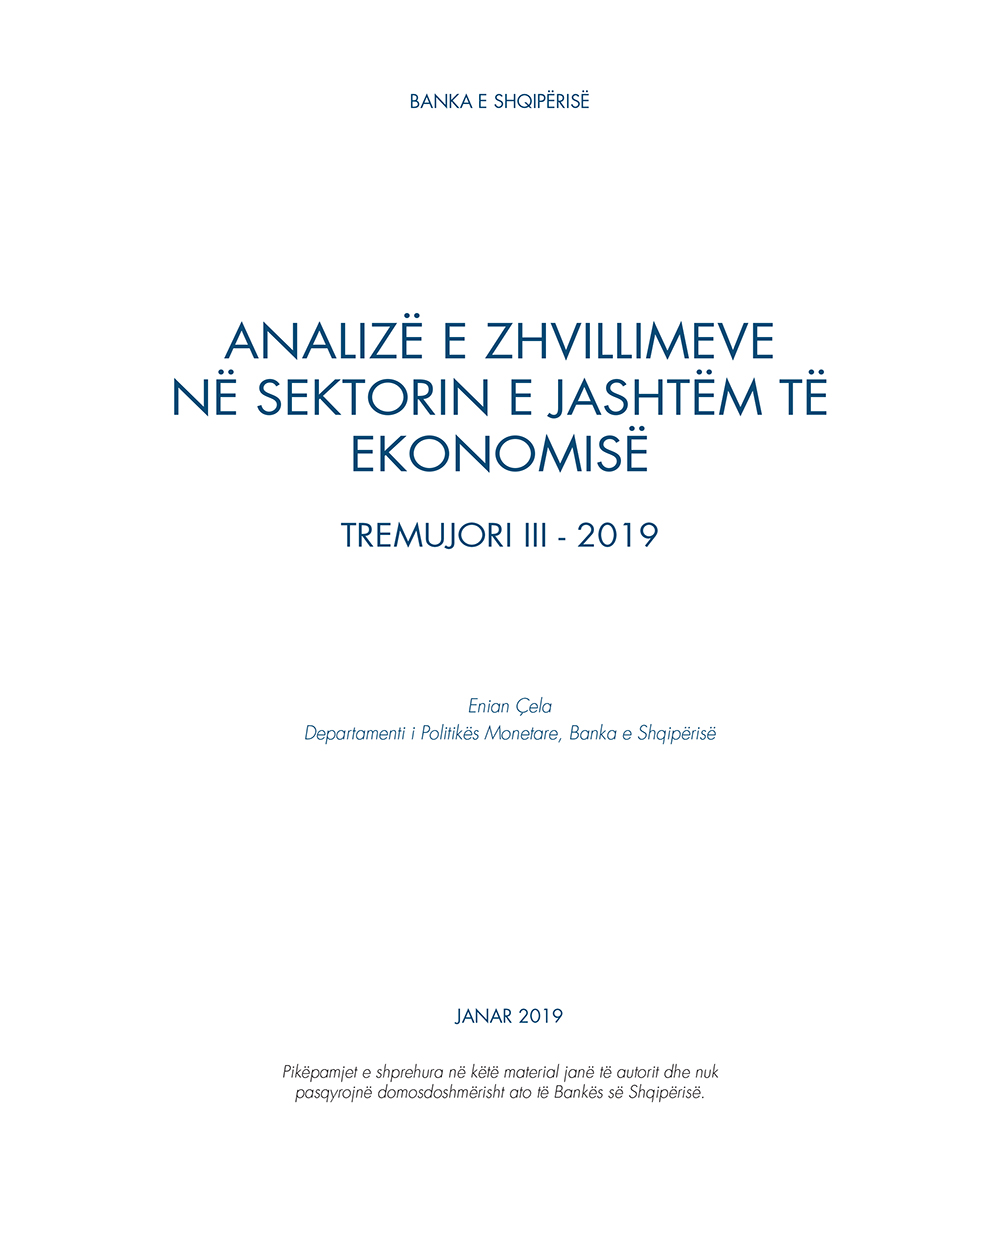 Analysis of developments in the external sector of the economy 2019 Q3